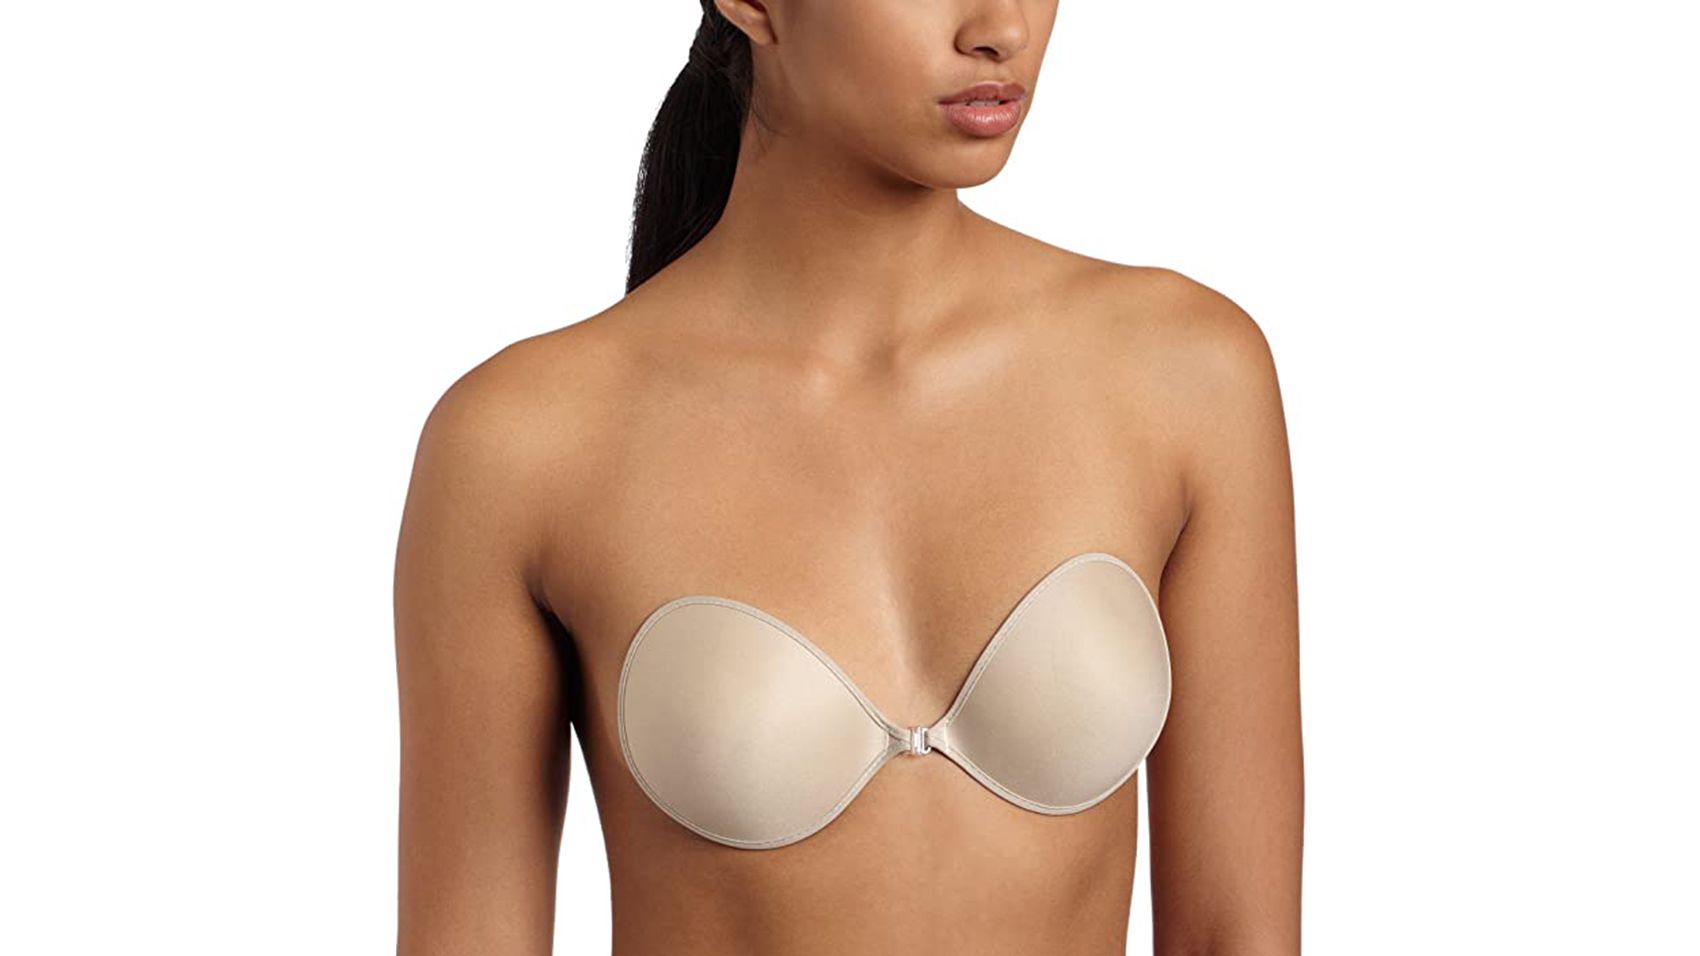 Premium AI Image  Isolated of Strapless Bras Flexible Fabric Spandex  Adjustable Straps on White Blank Clean Fashion